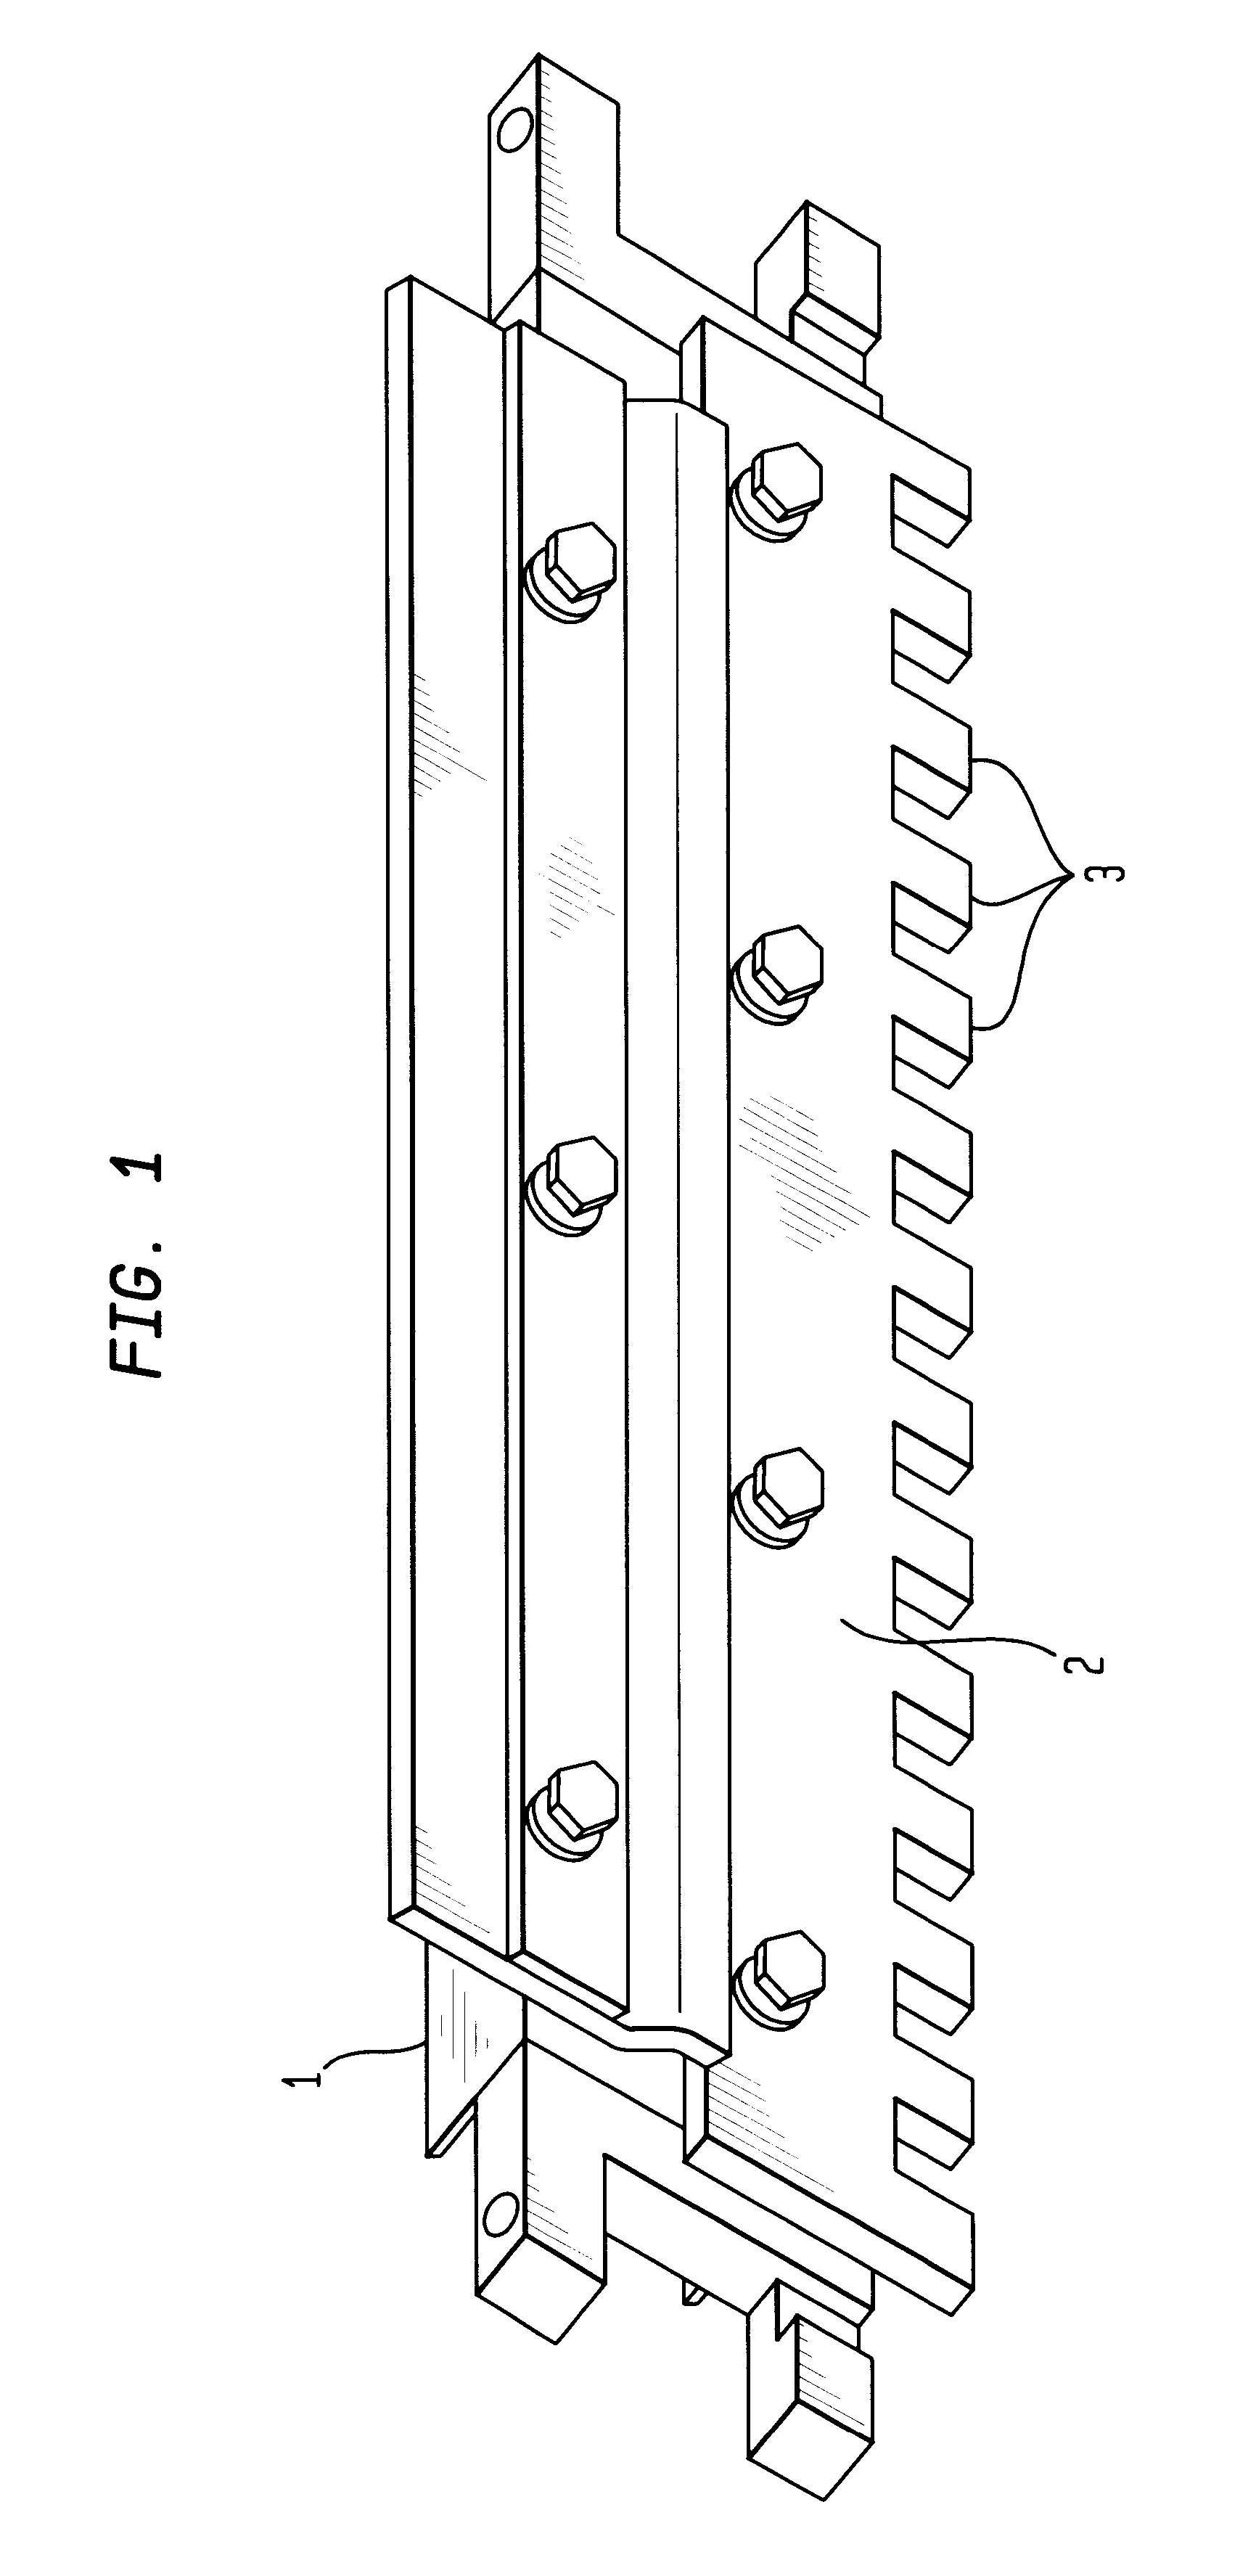 Apparatus for manufacturing concrete masonry units